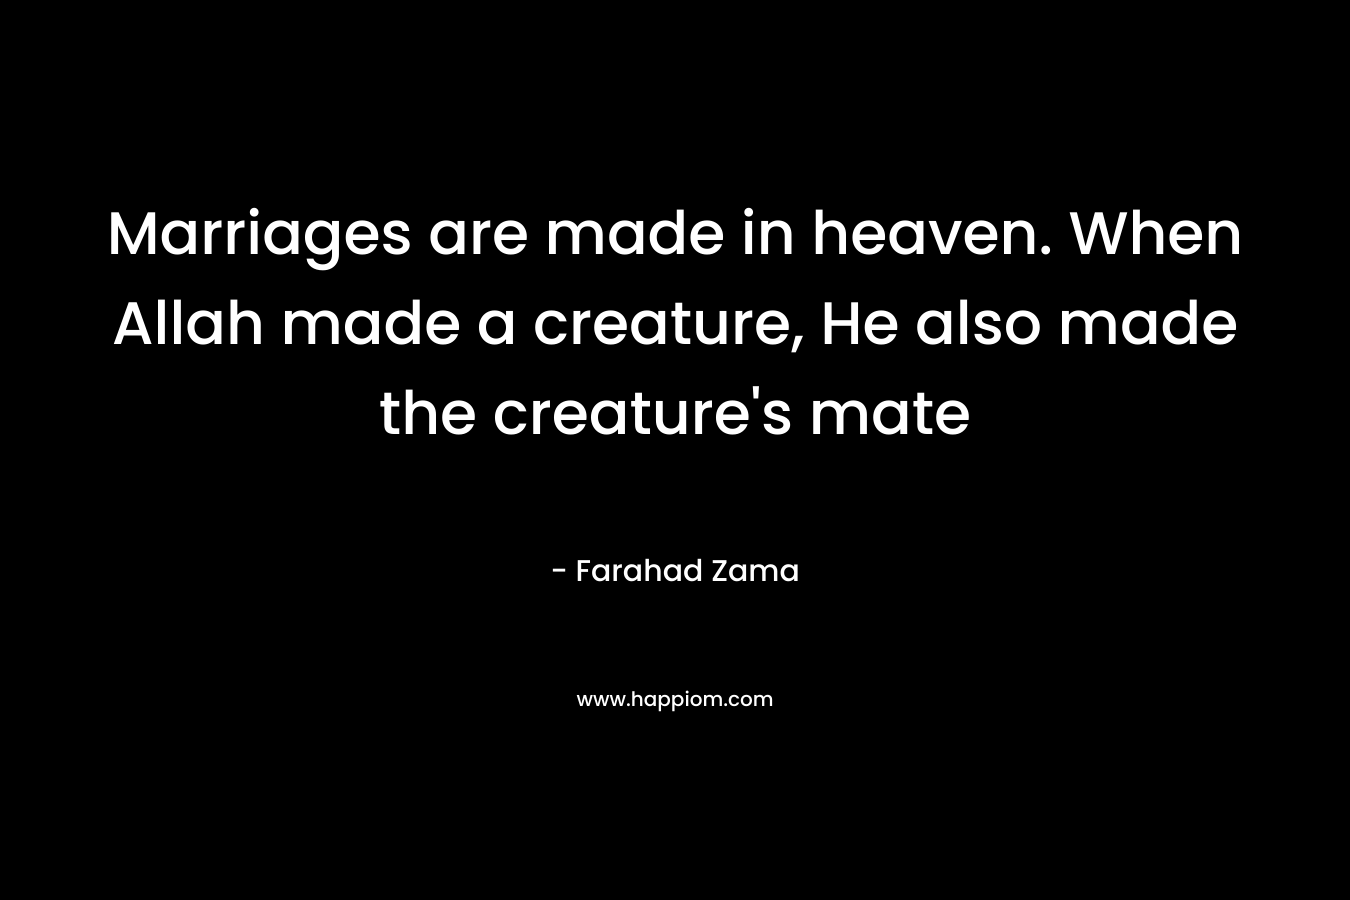 Marriages are made in heaven. When Allah made a creature, He also made the creature’s mate – Farahad Zama